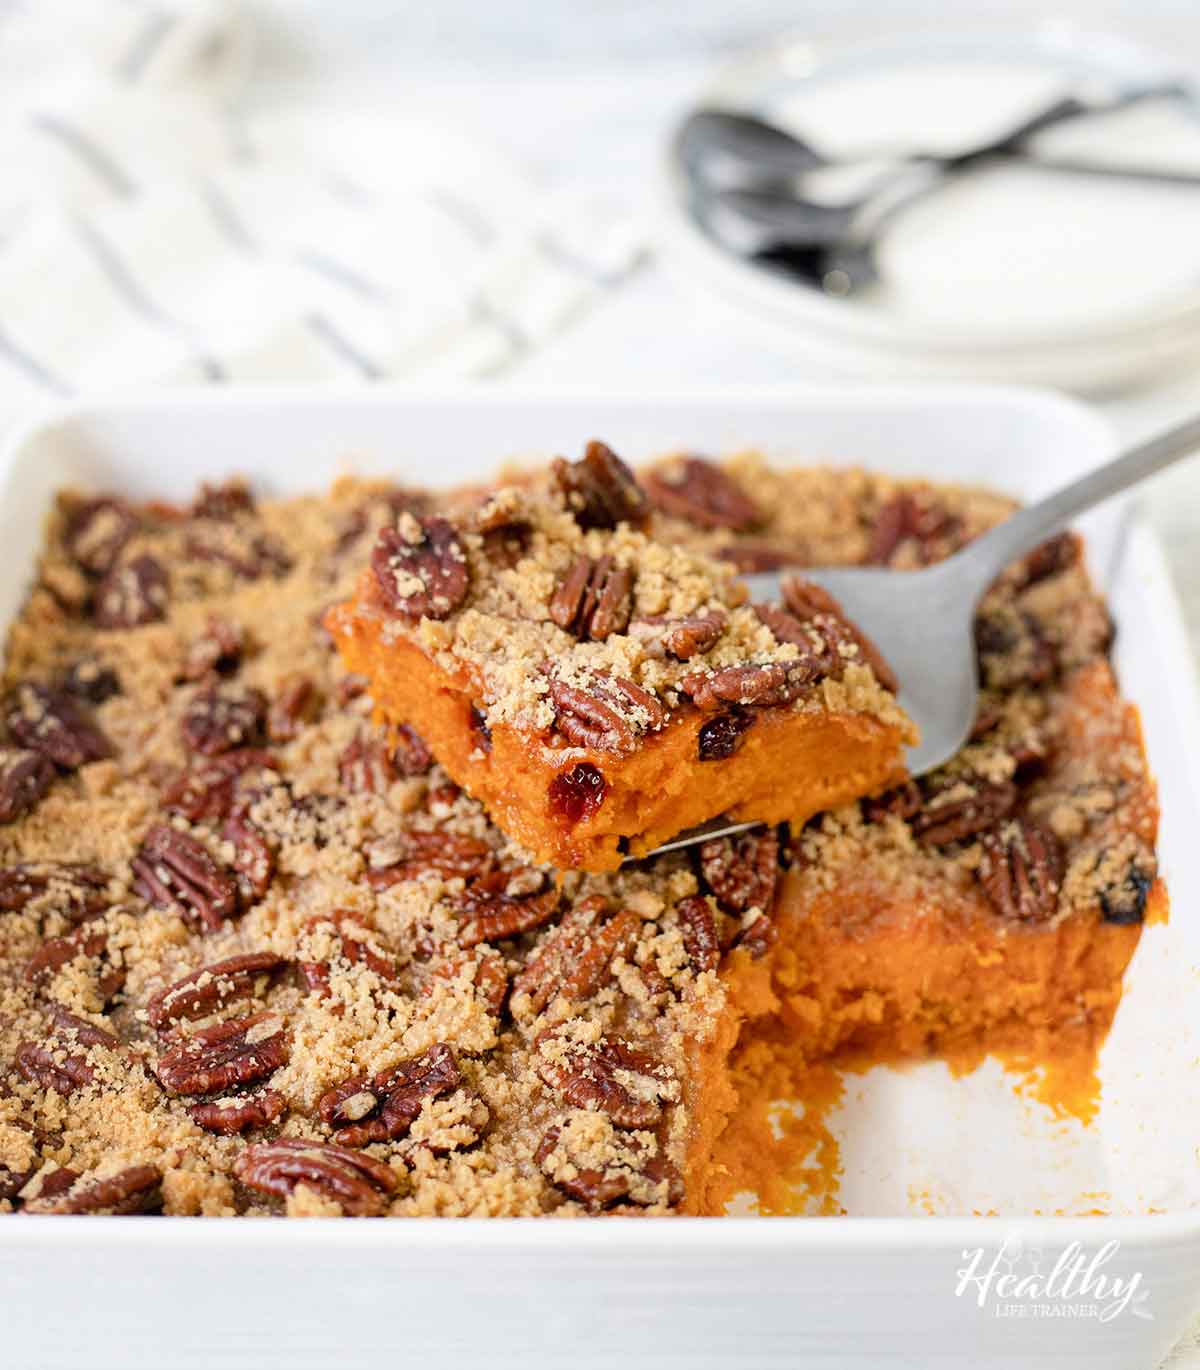 Cut a slice of the old fashioned sweet potato casserole topped with pecans.